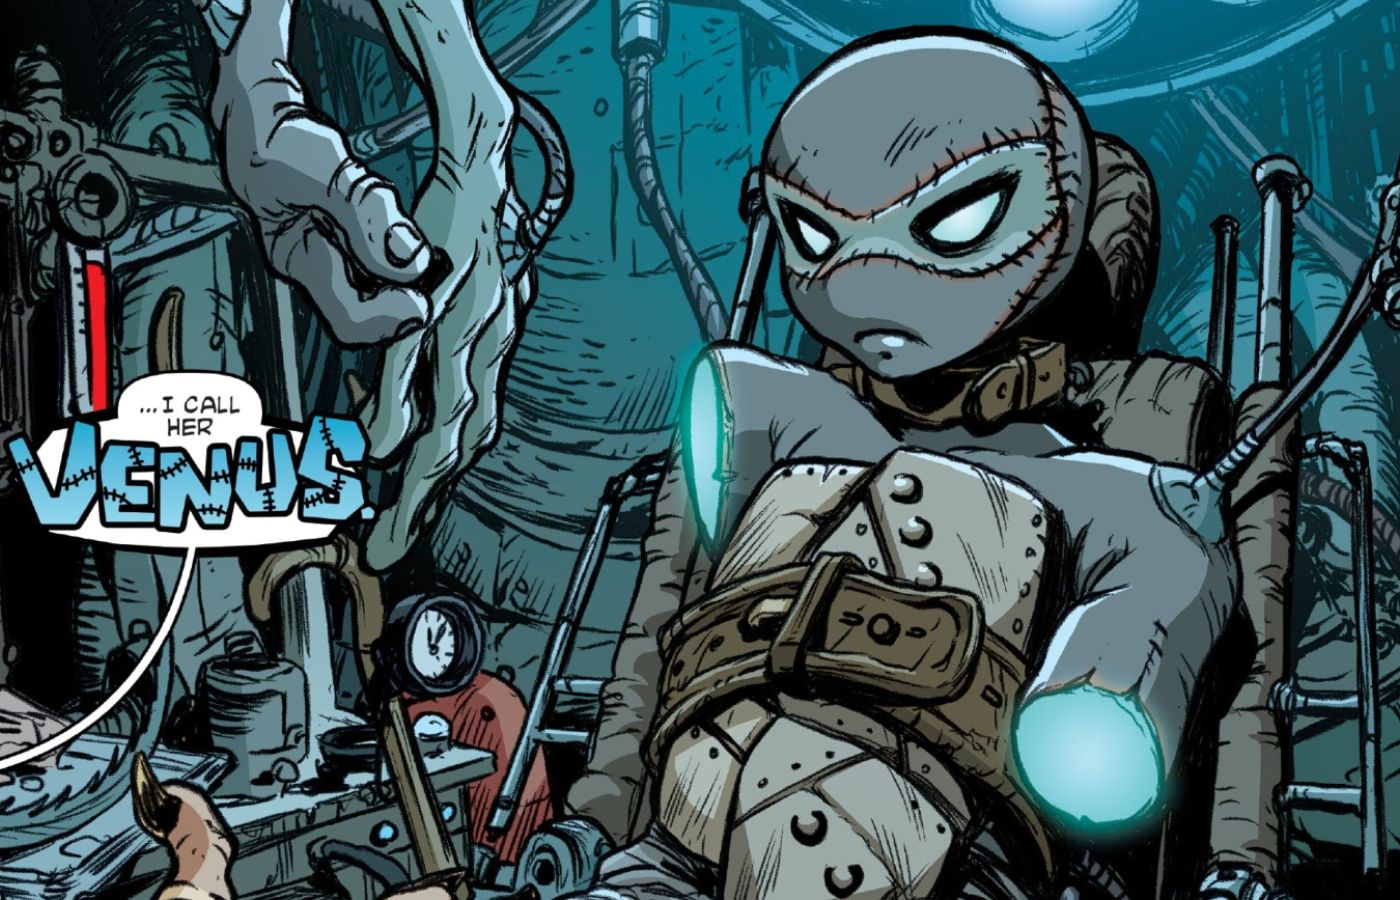 TMNT Redefines First Female Turtle's Sexist Name with Horrifying New Form